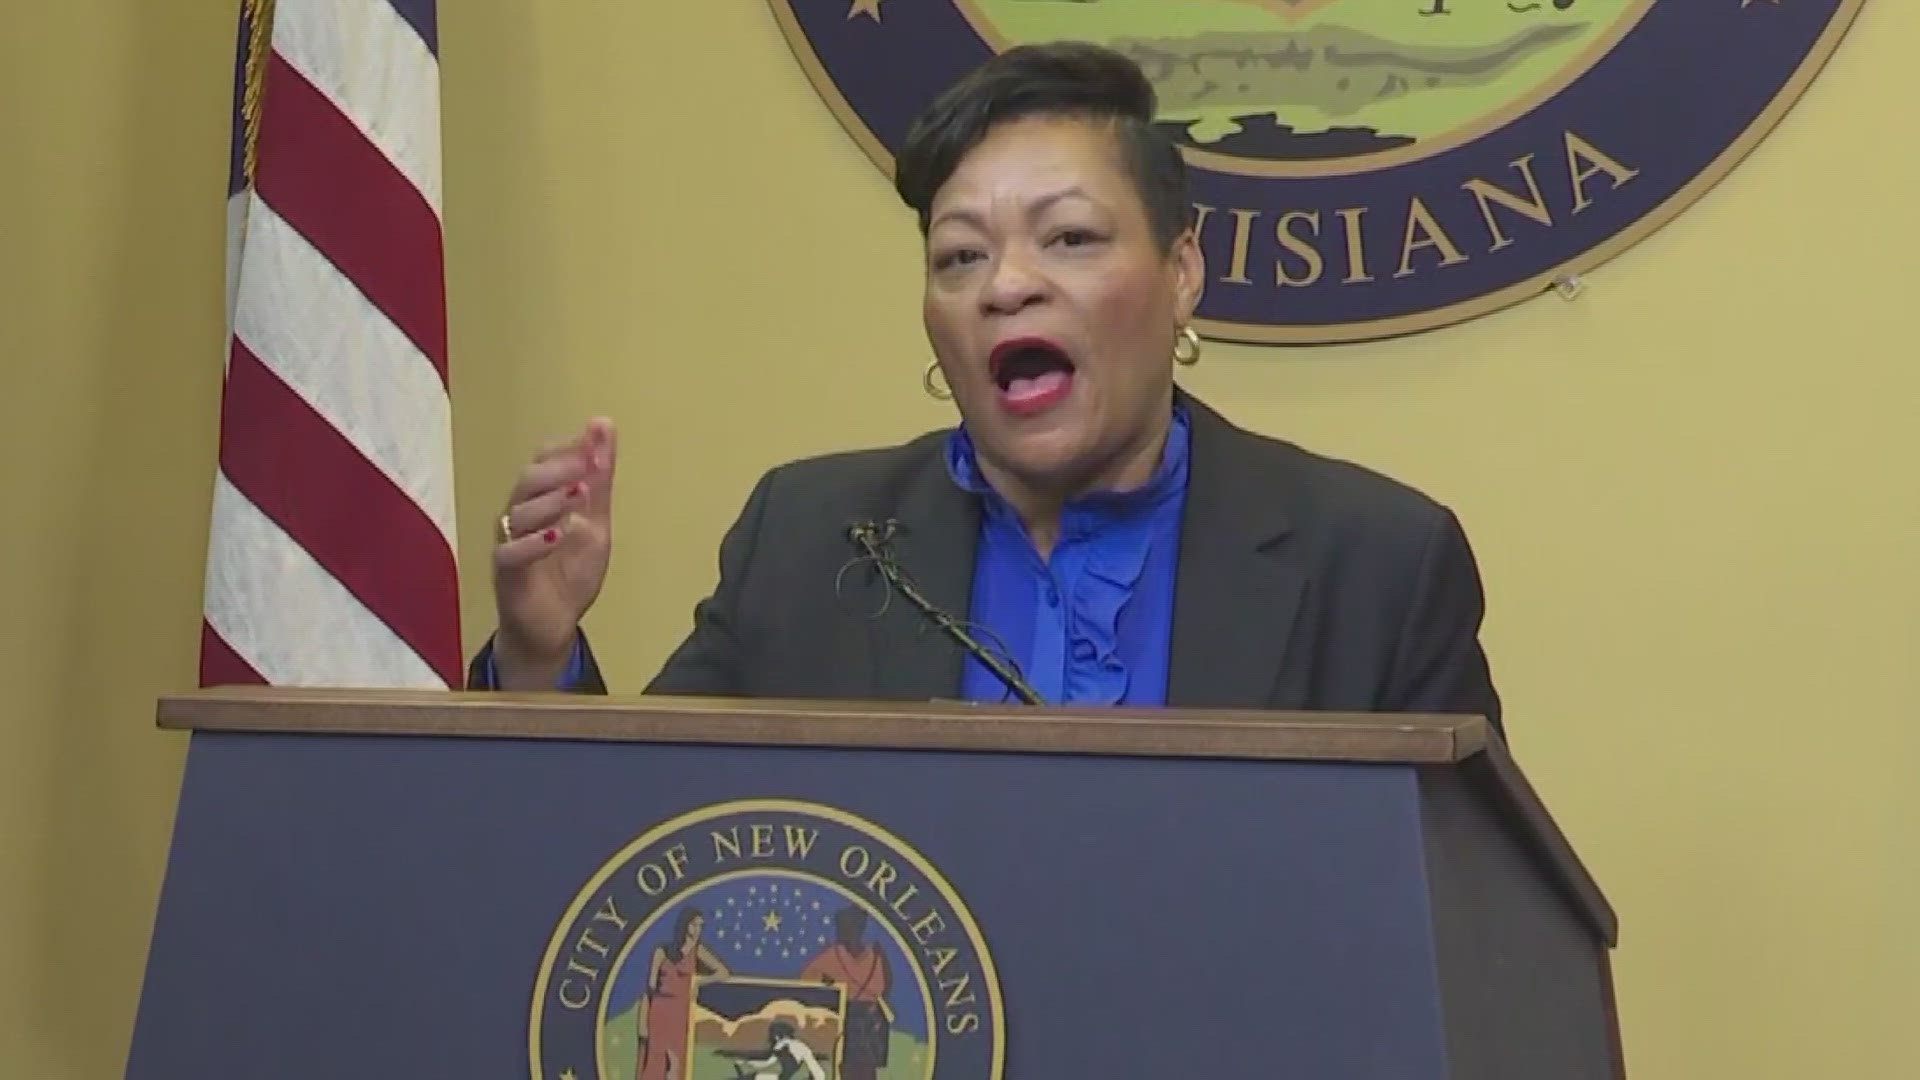 New Orleans Mayor LaToya Cantrell apologized on Wednesday for comments she made last week following deadly shootings that claimed the lives of several women.